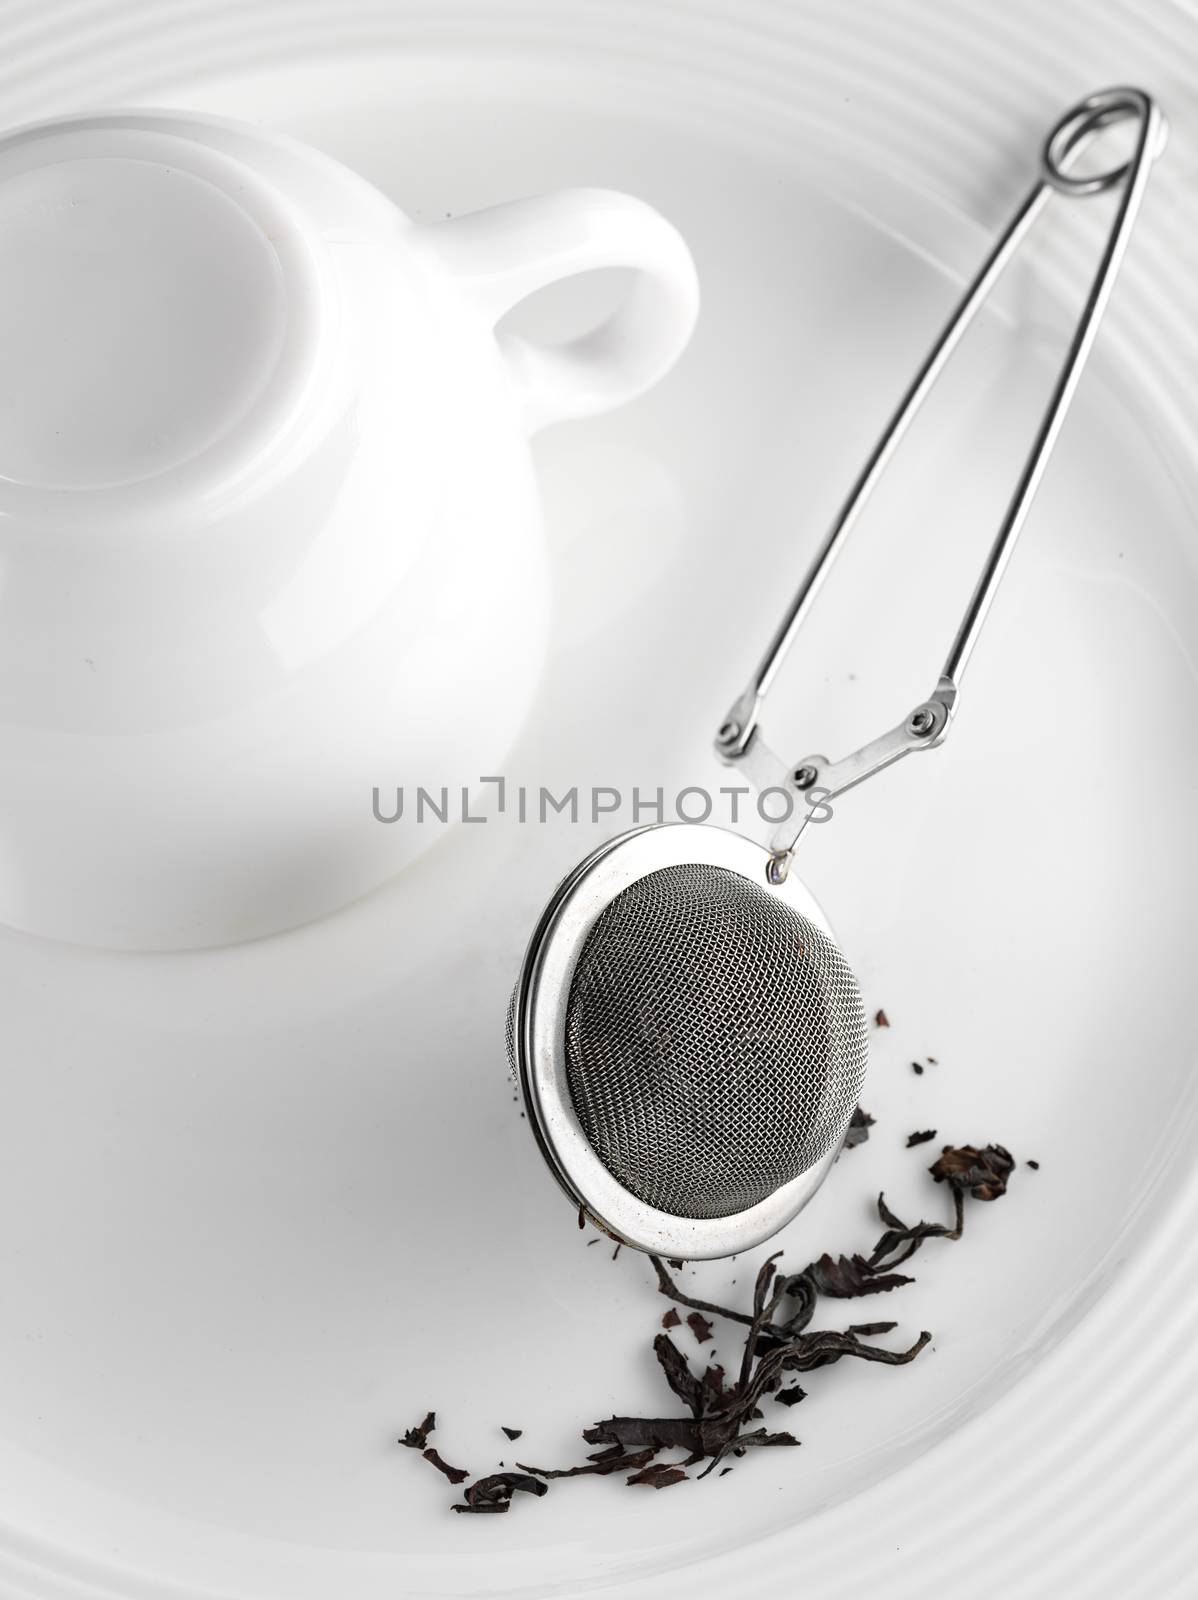 dry tea, strainer, cup on white plate